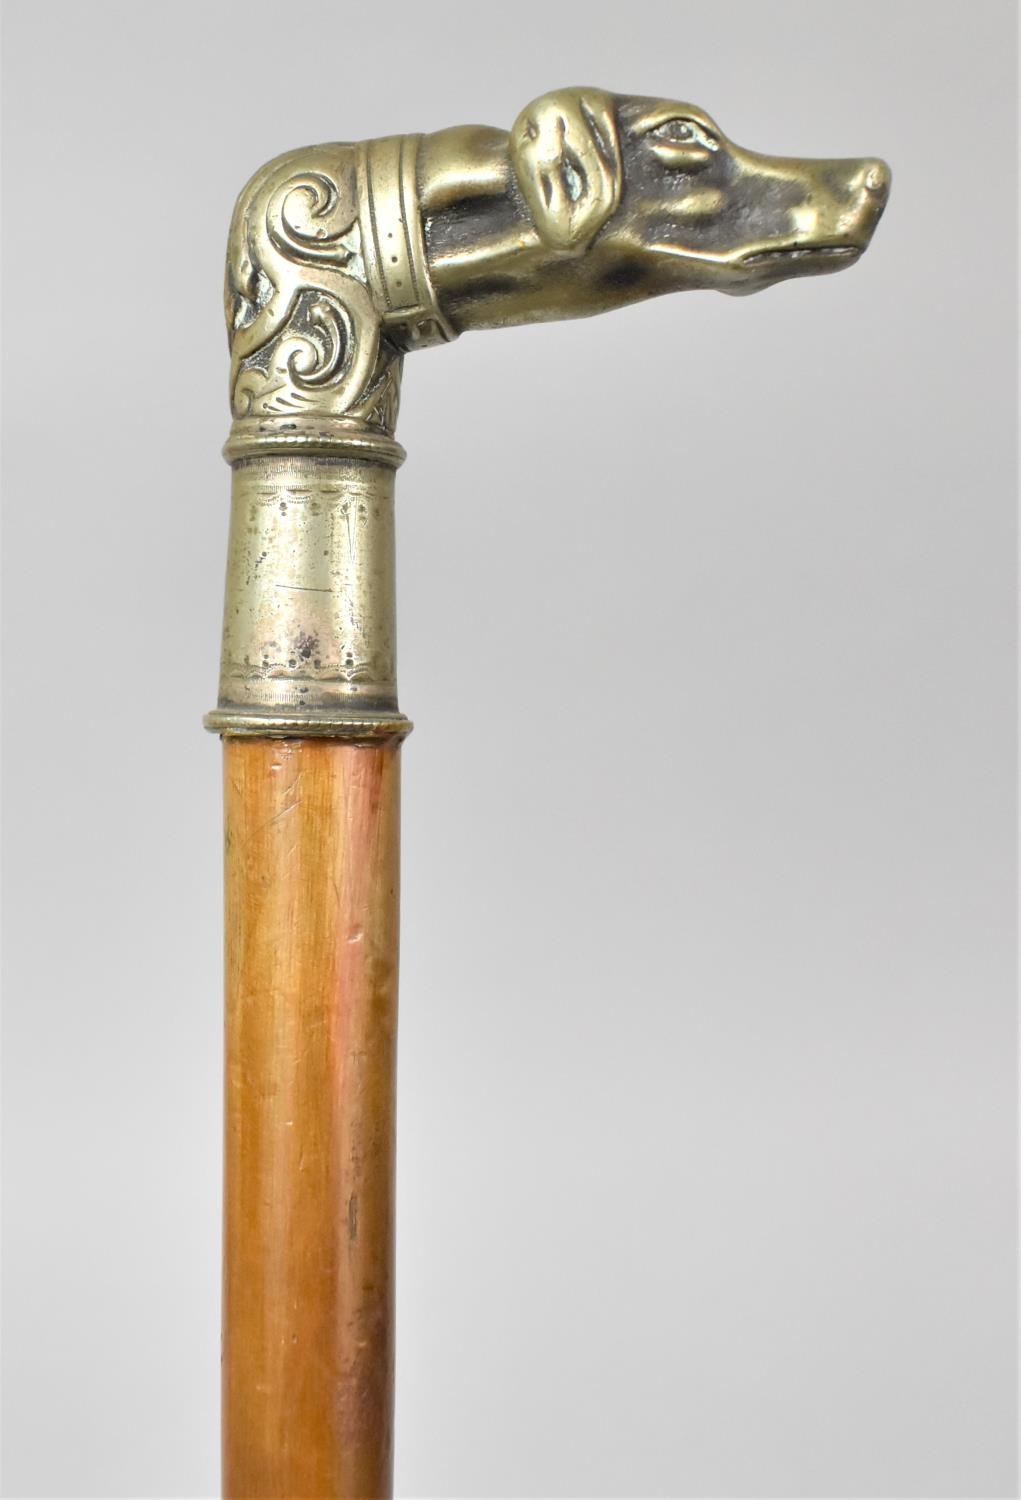 A 19th Century Walking Stick with a White Metal Handle Modelled as a Hunting Dog, 86cm Long - Image 2 of 5